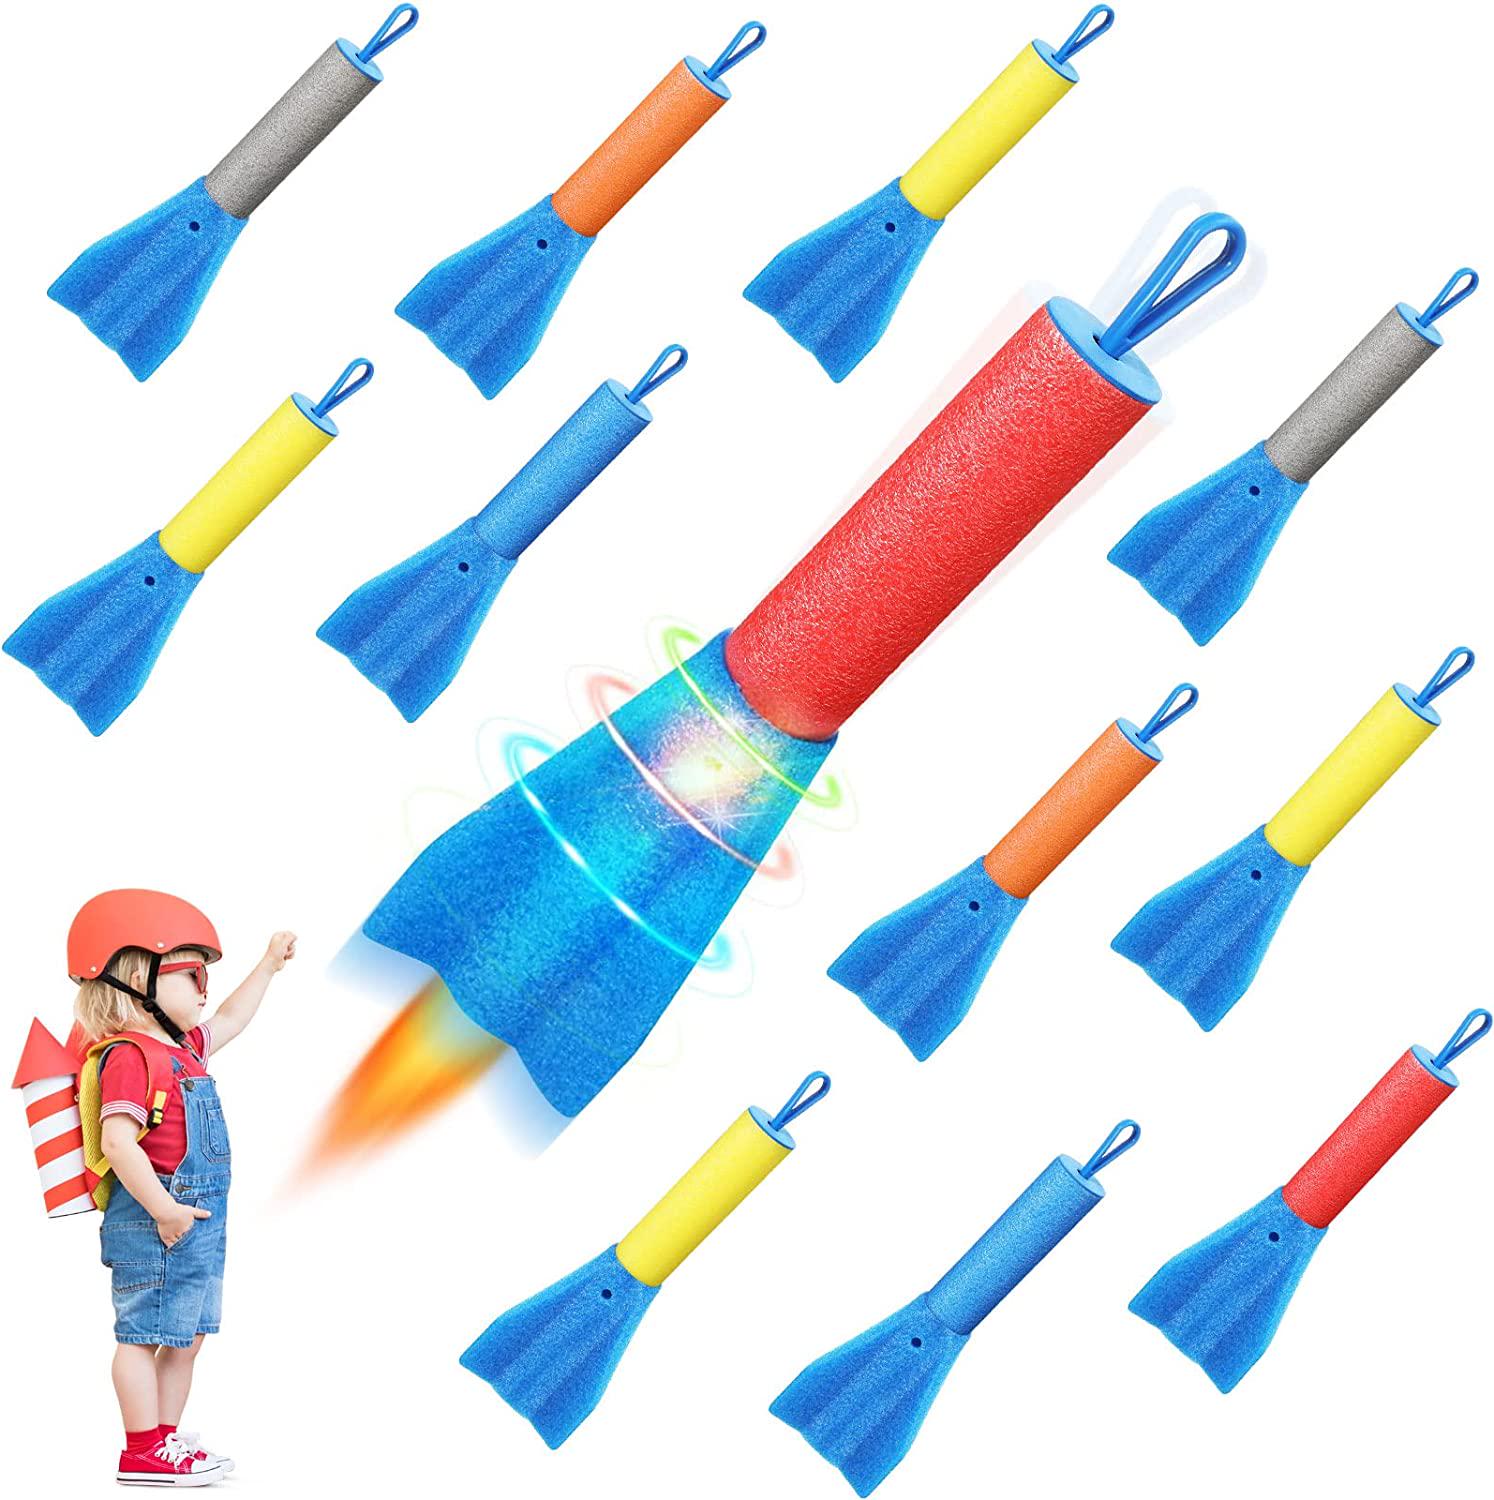 Macarrie, Macarrie 12 Packs Slingshot Finger Rockets Toys LED Foam Rocket Launcher Fun Outdoor Toy for Summer Outdoor Indoor Camping Games Activities Party Favors, Flying Light up to 100 Feet